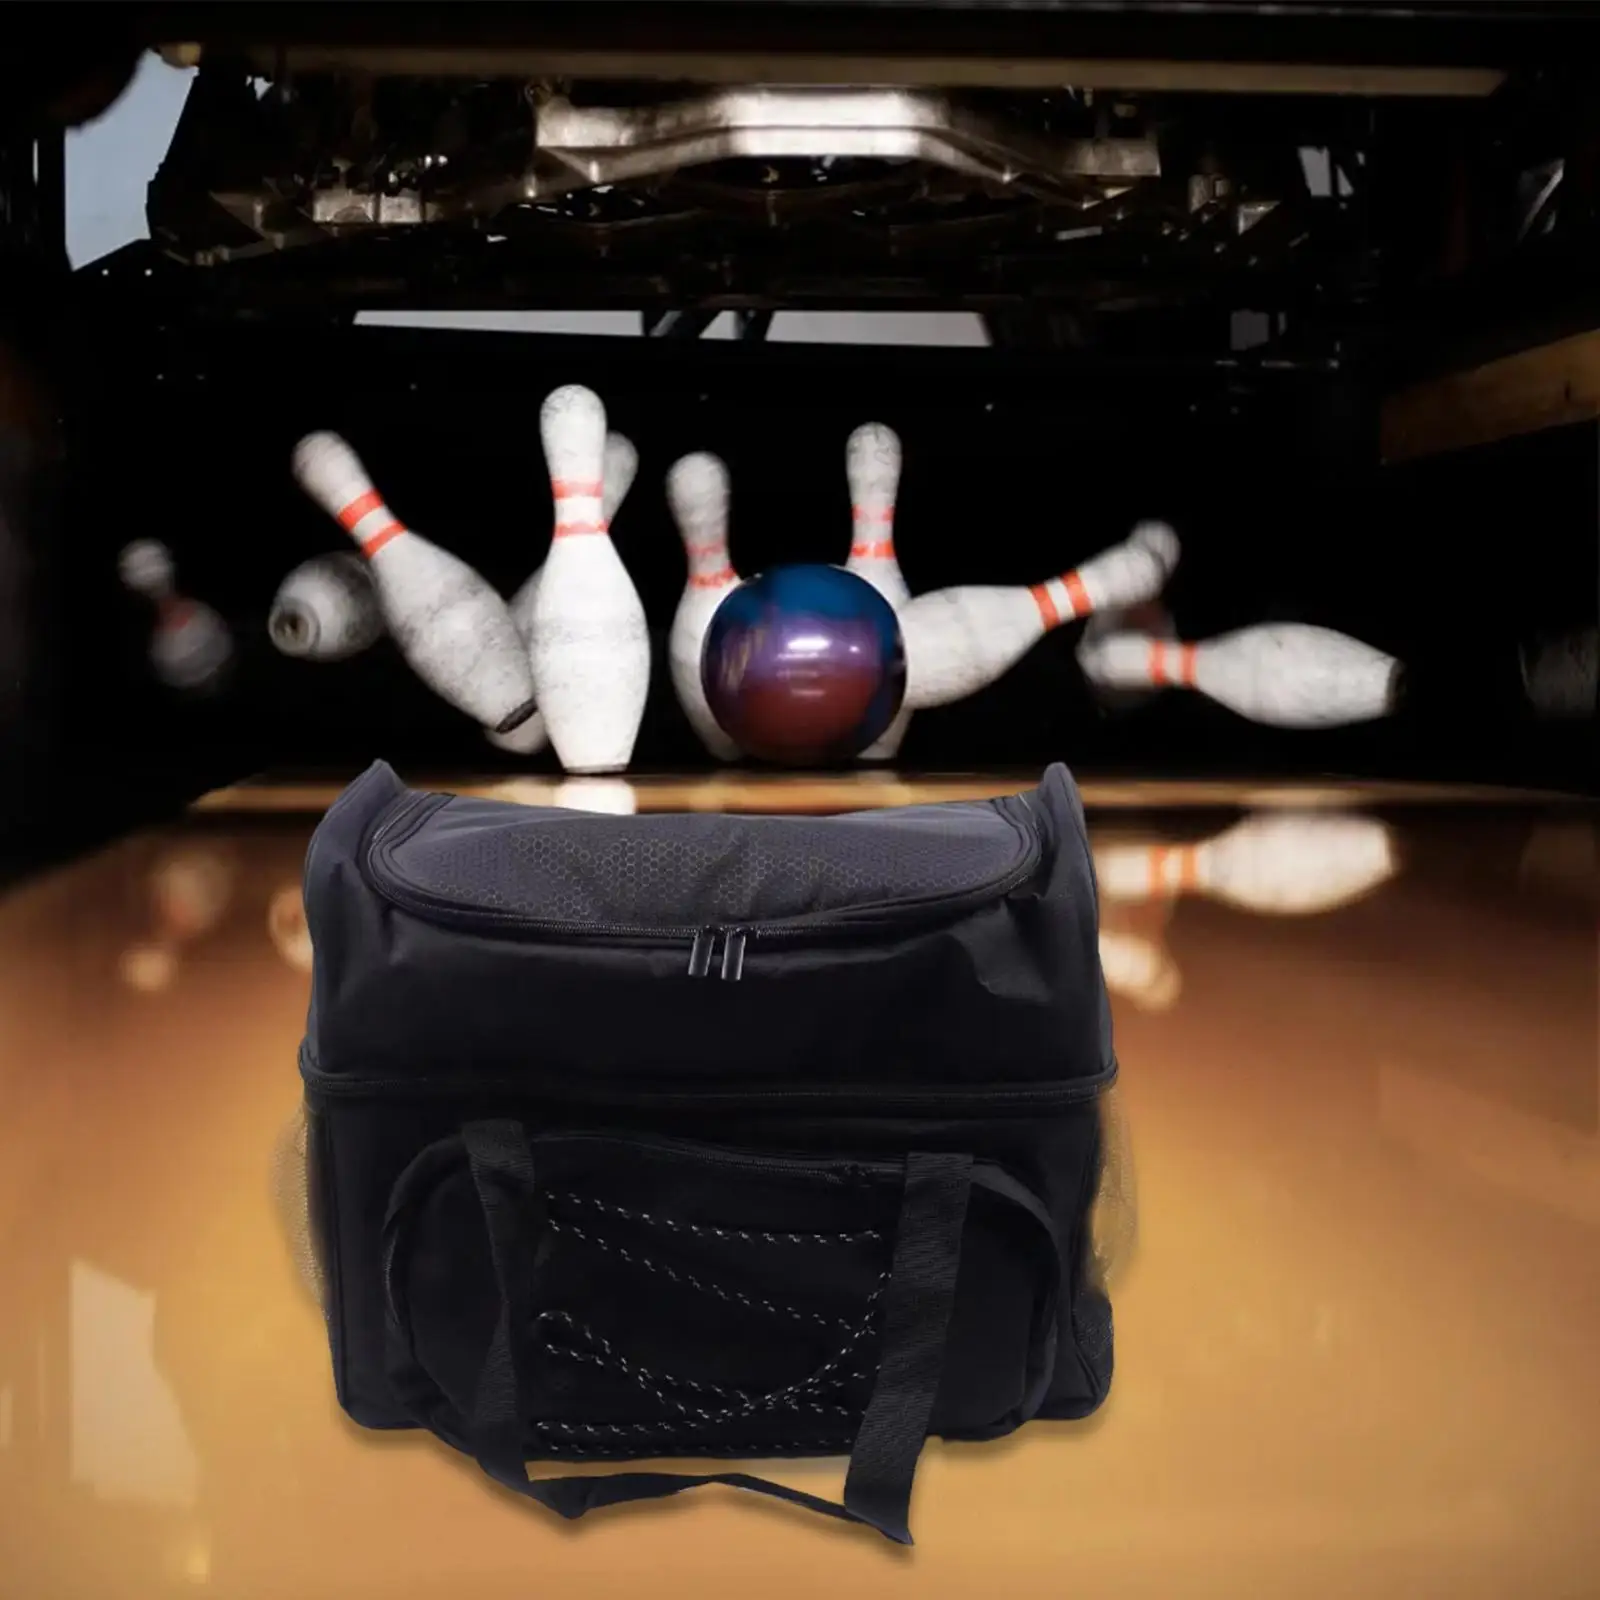 Bowling Bag for Two Balls Handbag Storage Pocket Nylon Durable Bowling Tote Bag Carrier Fits Bowling Shoes up to Mens Size 16